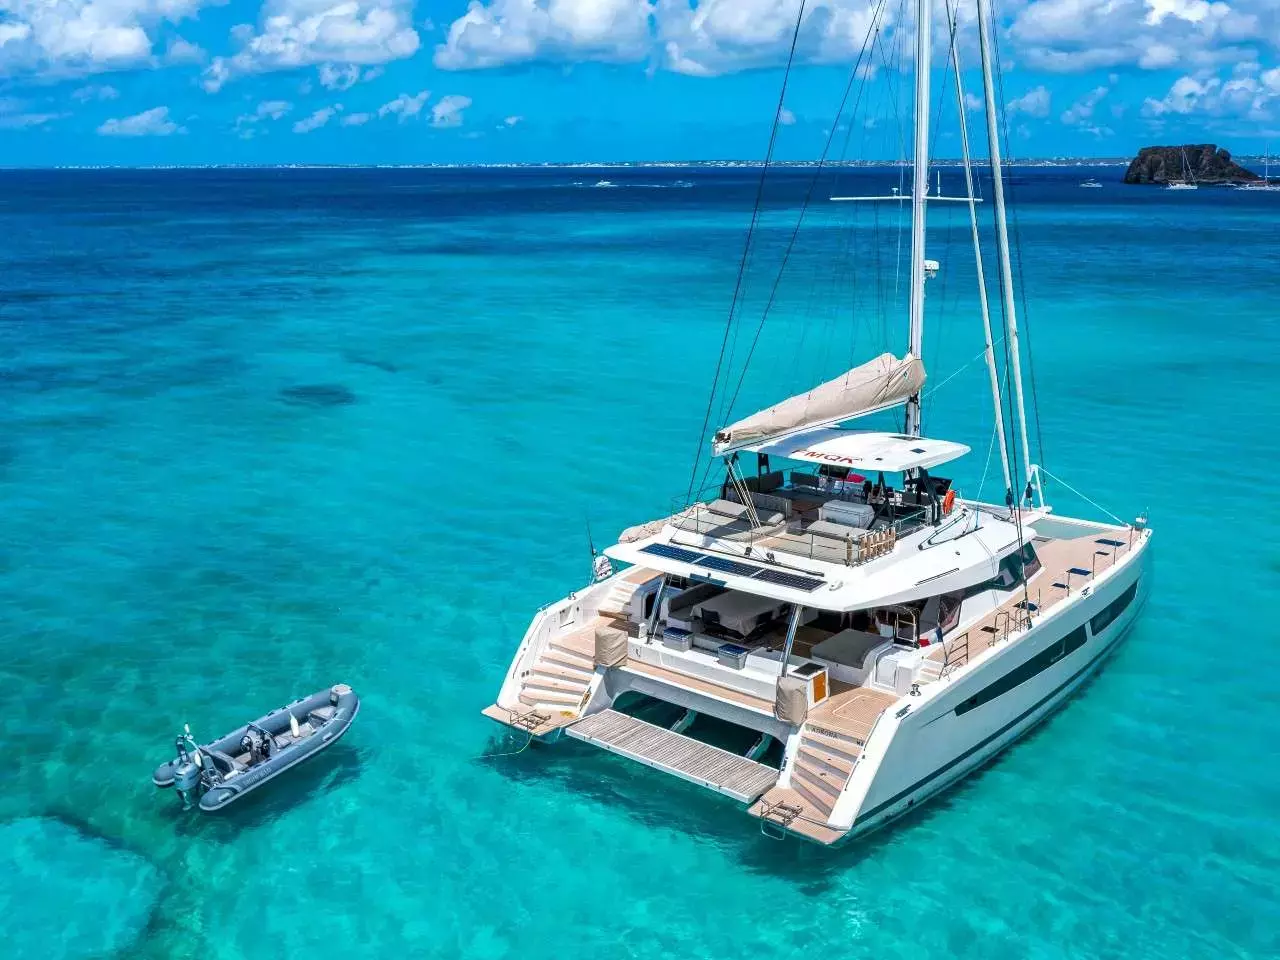 Adeona by Fountaine Pajot - Top rates for a Rental of a private Luxury Catamaran in Croatia